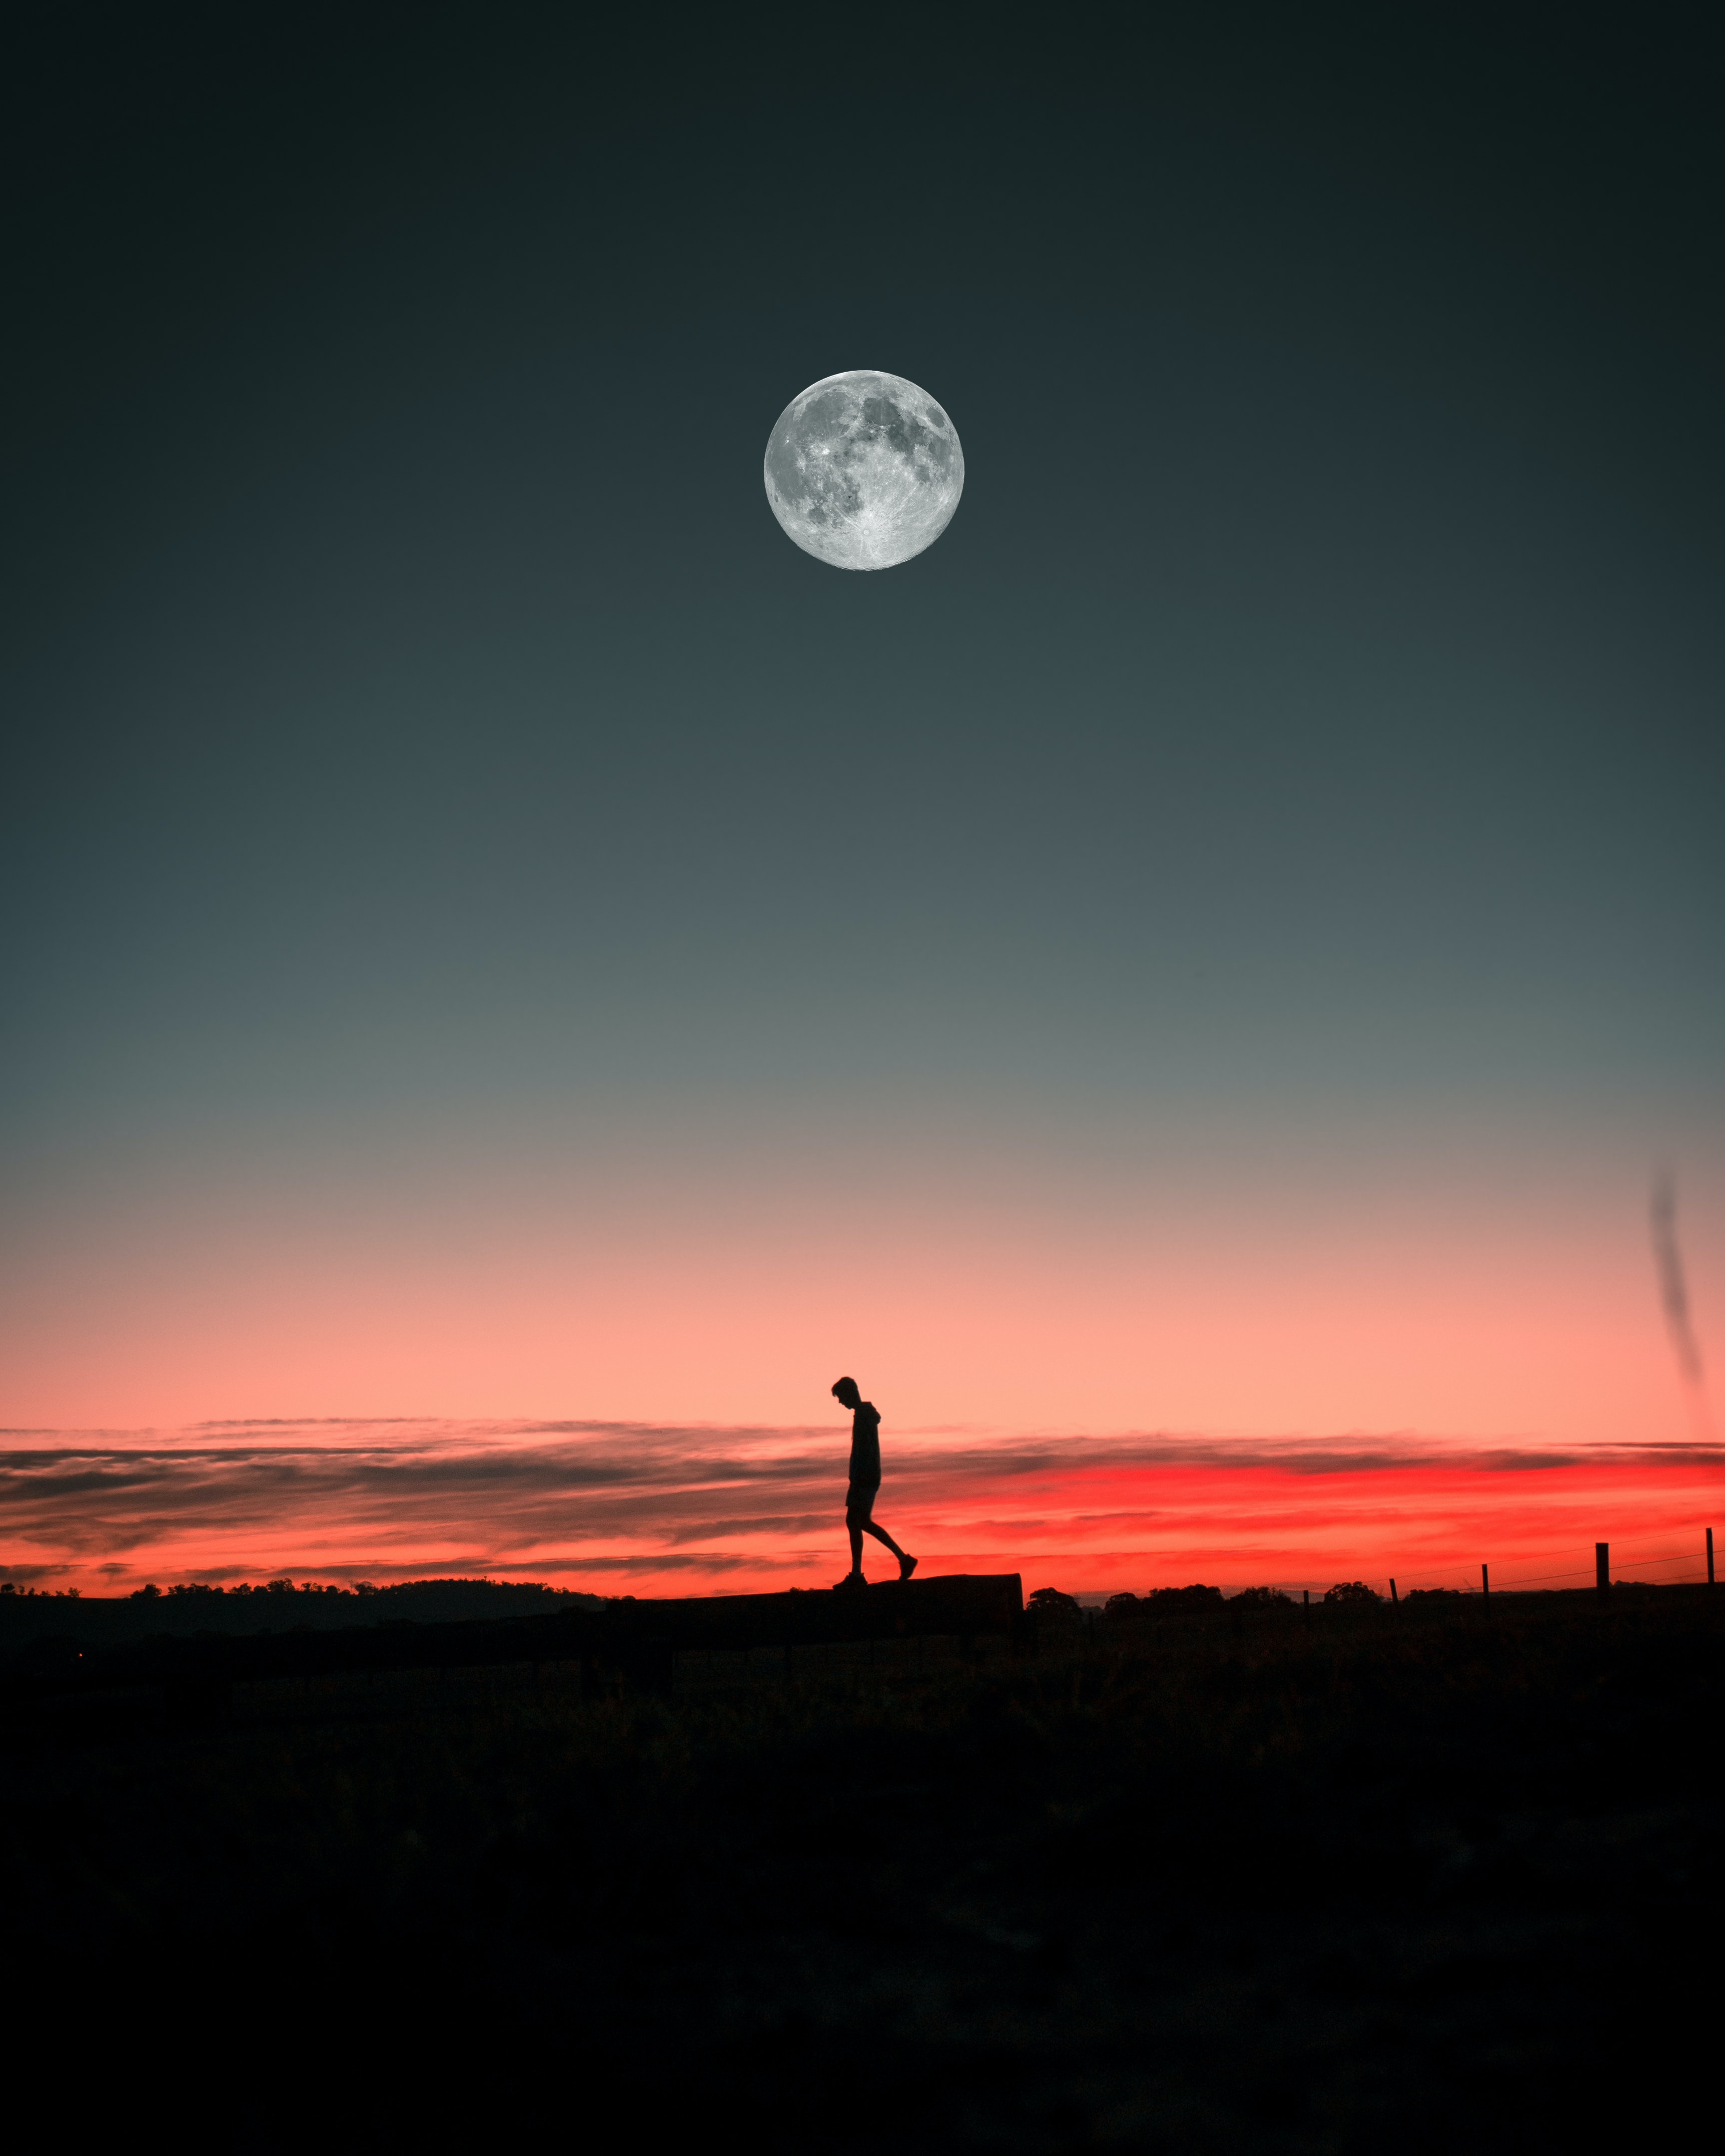 wallpapers loneliness, miscellanea, lonely, alone, moon, sunset, miscellaneous, silhouette